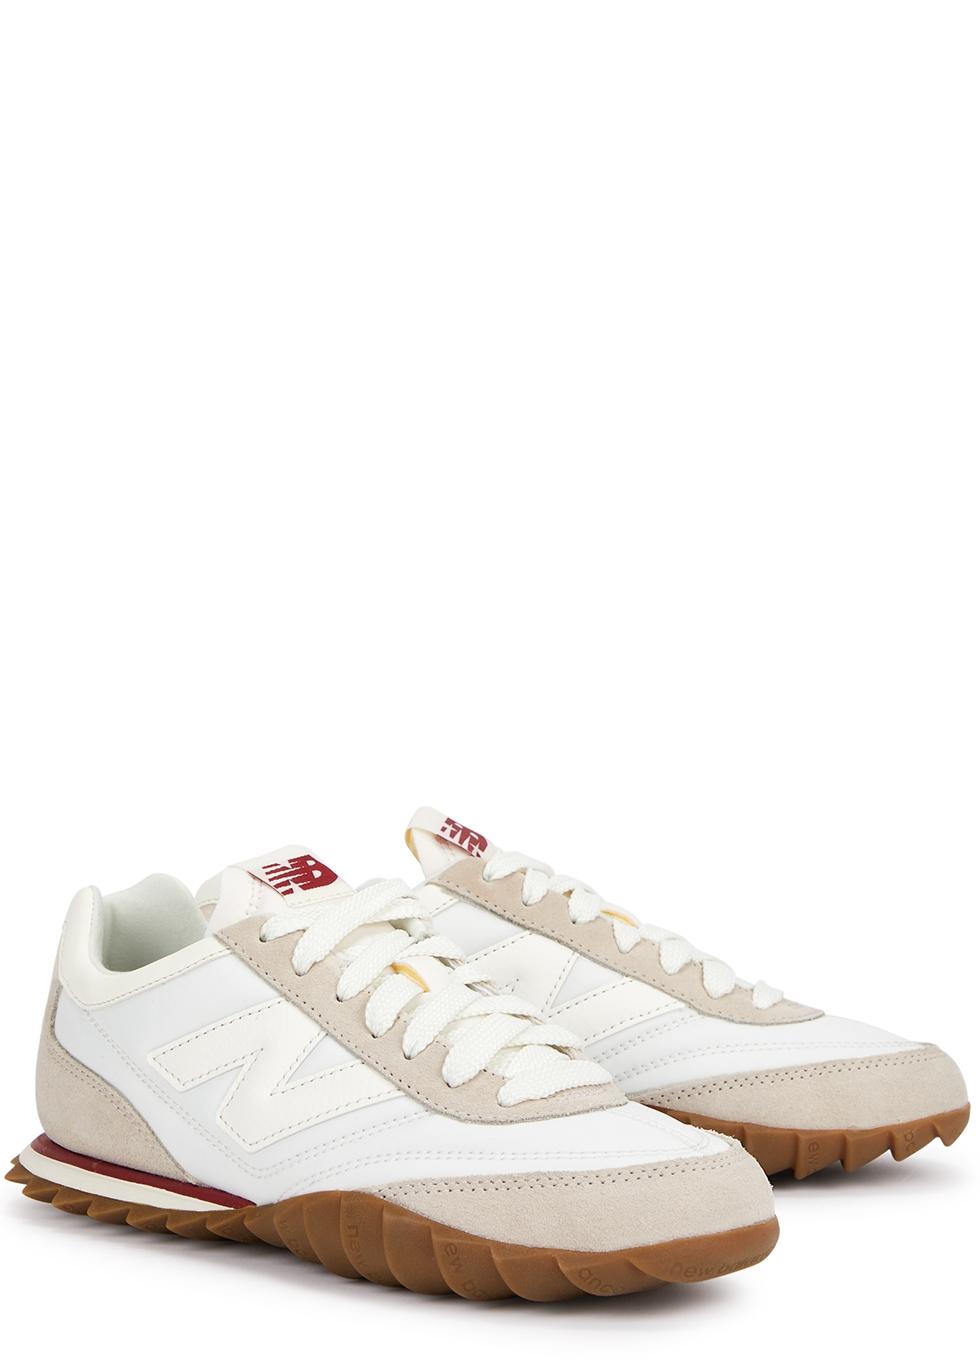 New Balance Rc30 Panelled Nylon Sneakers in White | Lyst